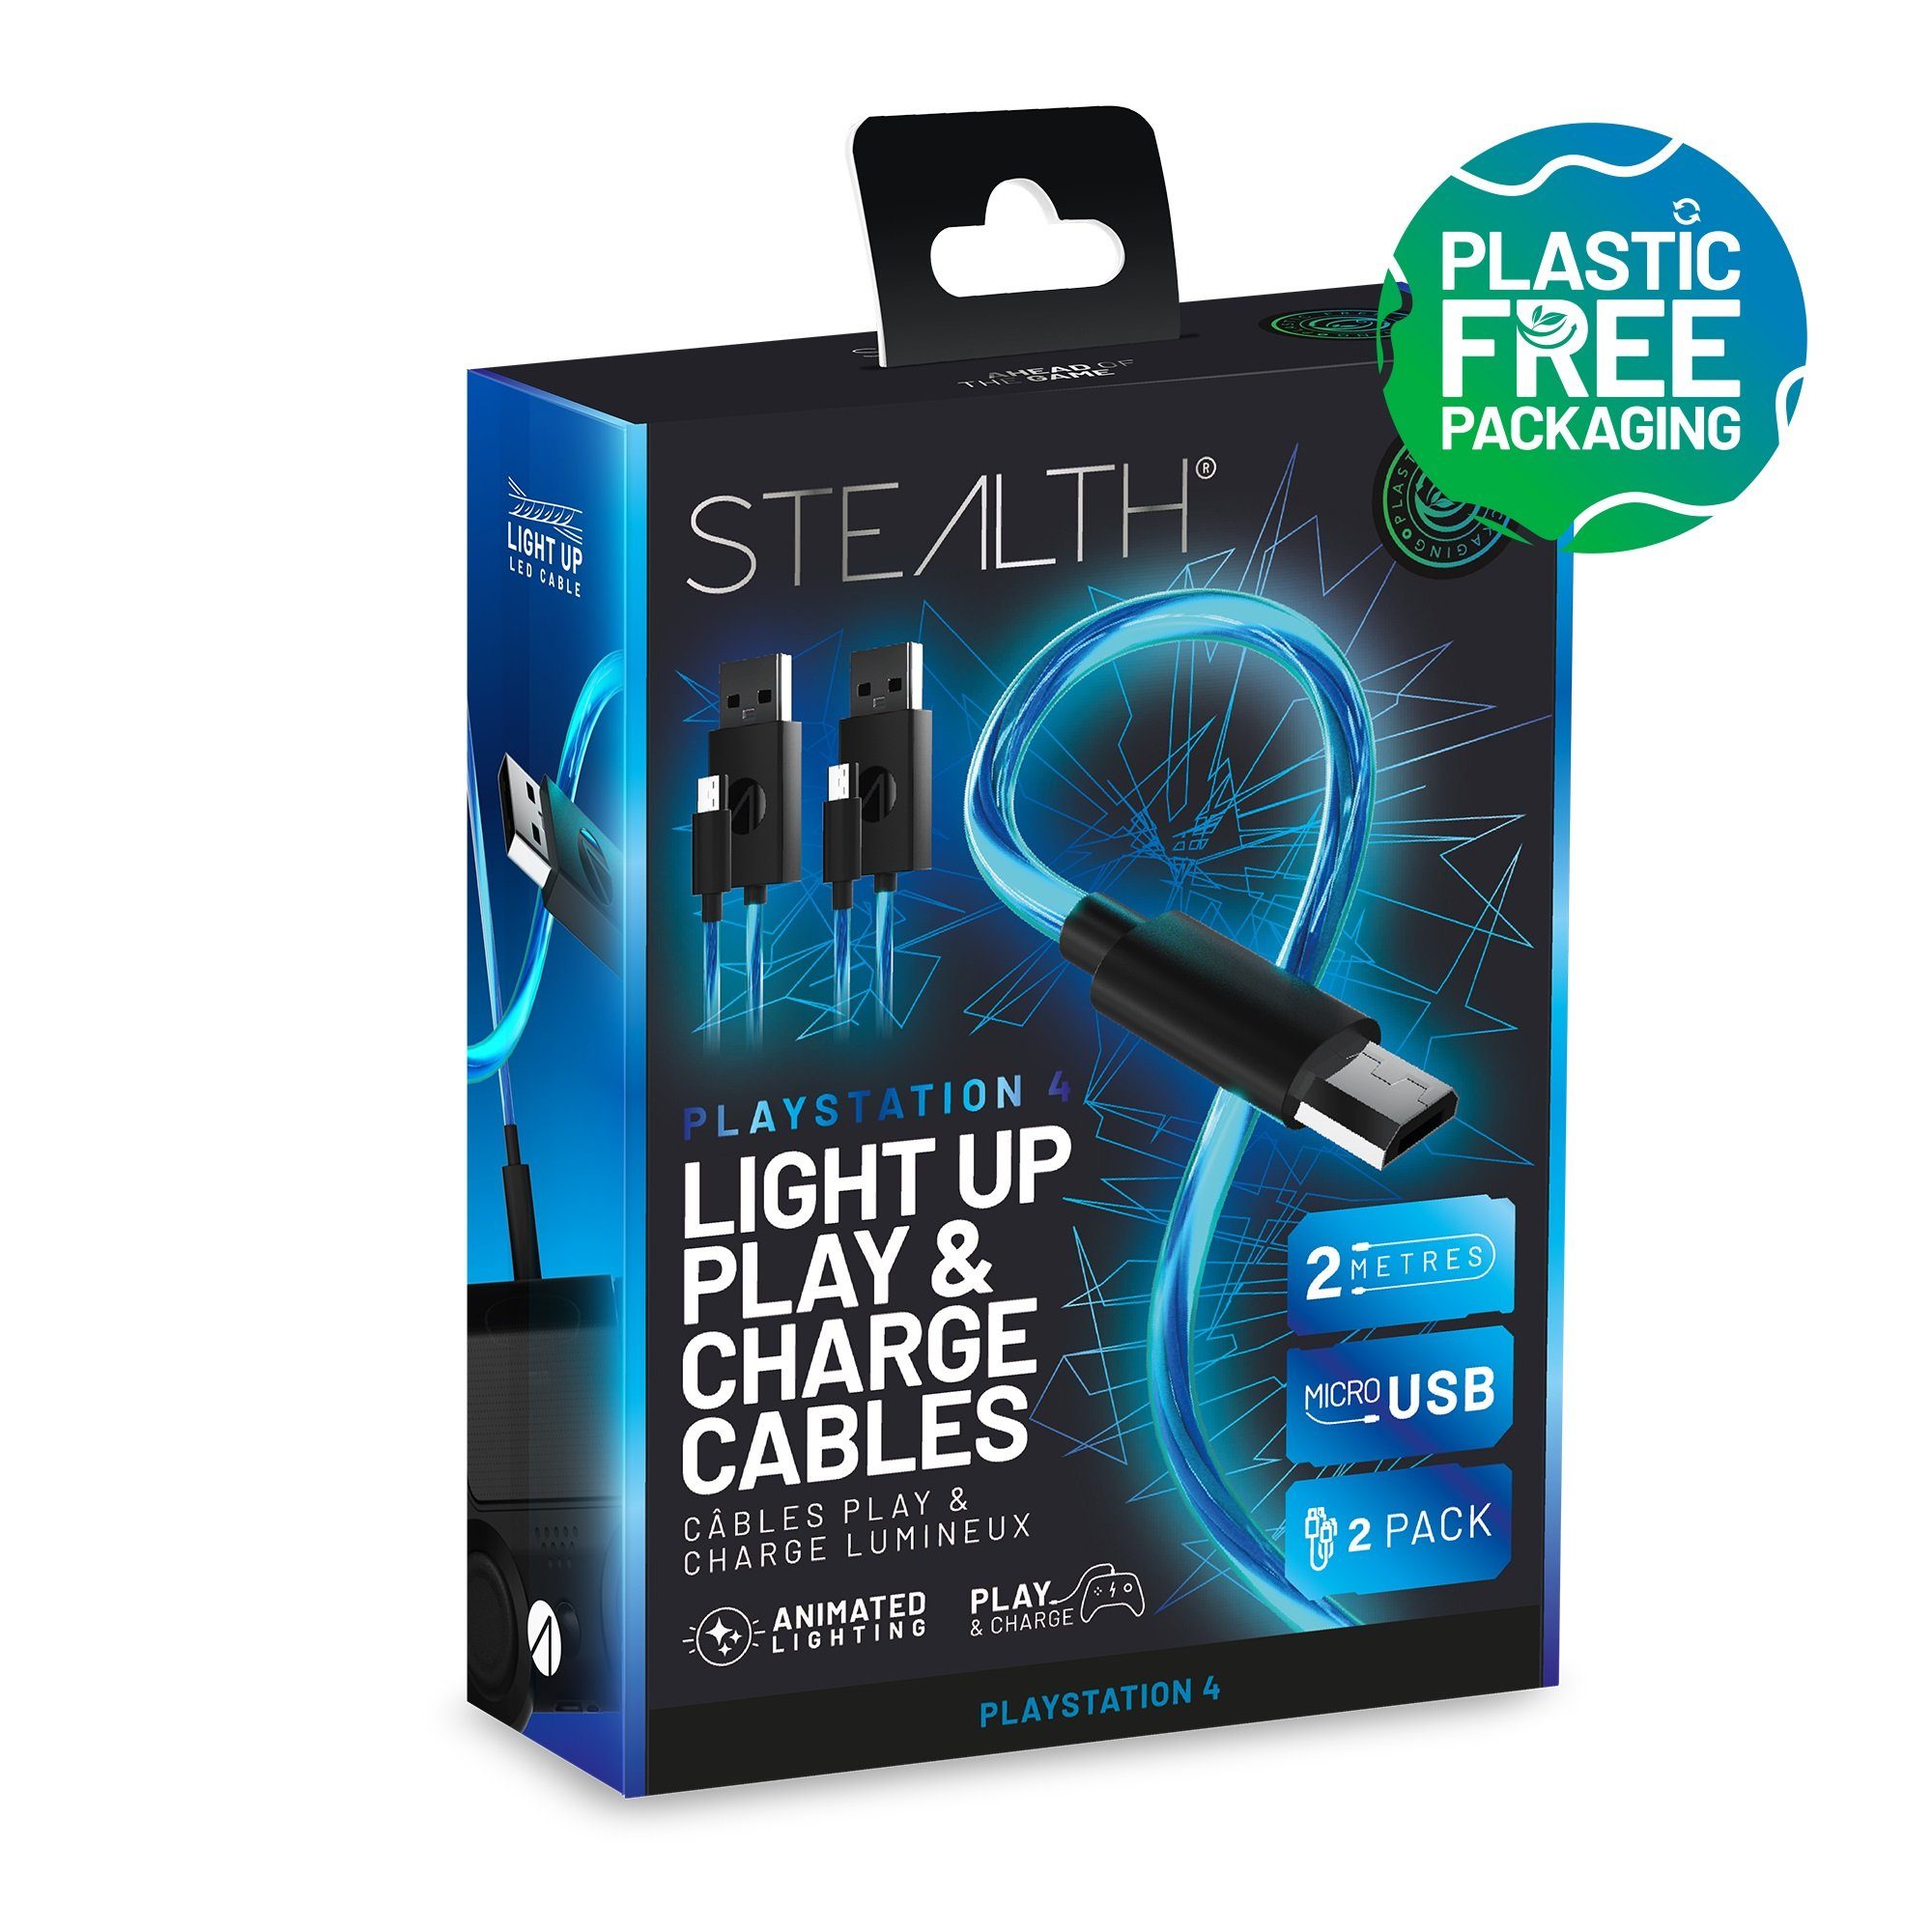 https://i.otto.de/i/otto/bf652239-f799-5a6f-b2ba-0357cdaace34/stealth-usb-kabel-doppelpack-2x-2m-play-charge-mit-led-beleuchtung-usb-kabel-micro-usb-200-cm-beleuchtung.jpg?$formatz$